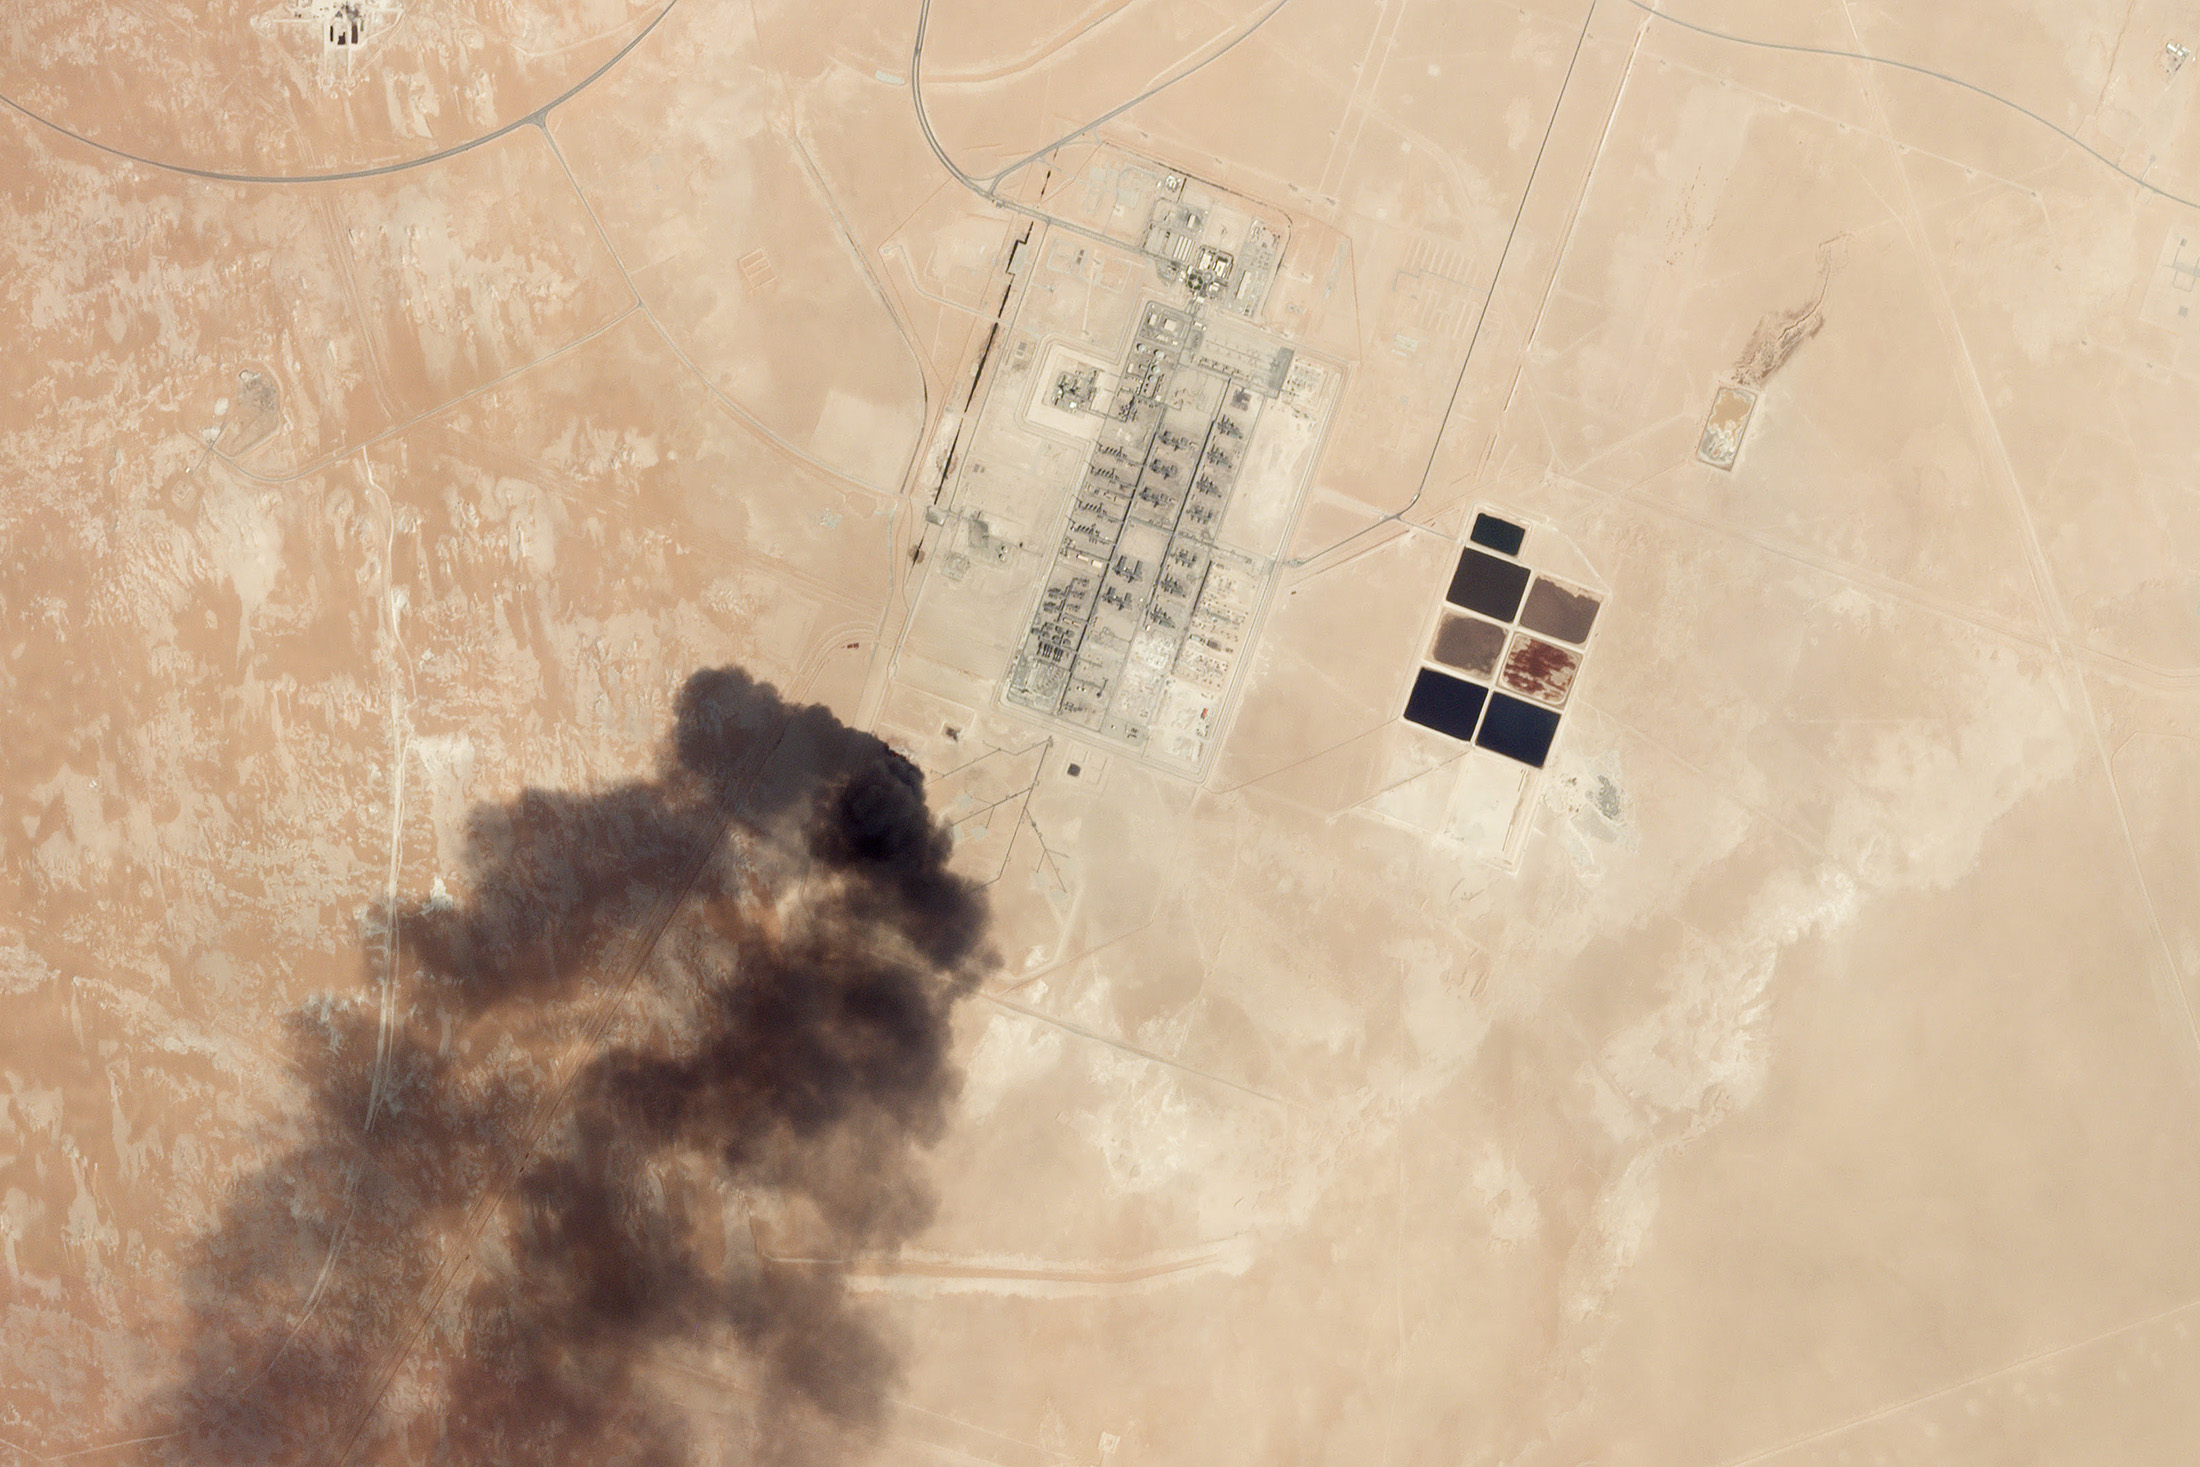 Satellite image showing smoke rising from the Abqaiq oil plant following a drone strike on Sept. 14.